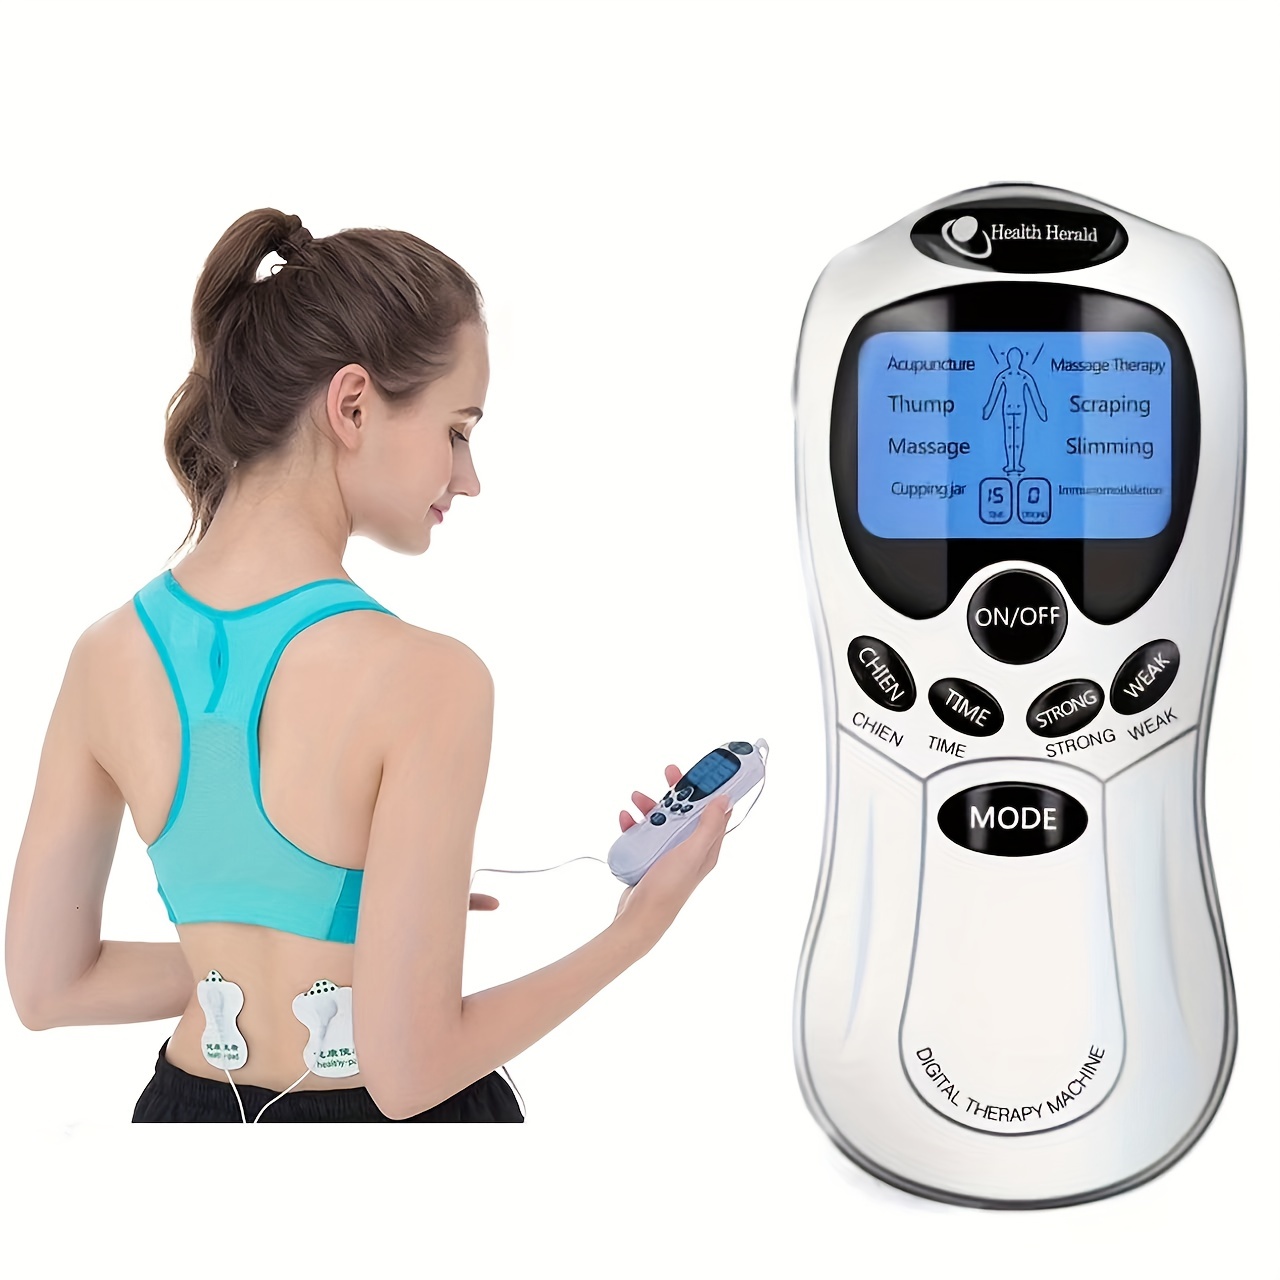 Muscle Stimulator Tens Machine - 8 Modes and Strength Settings - 14Candles